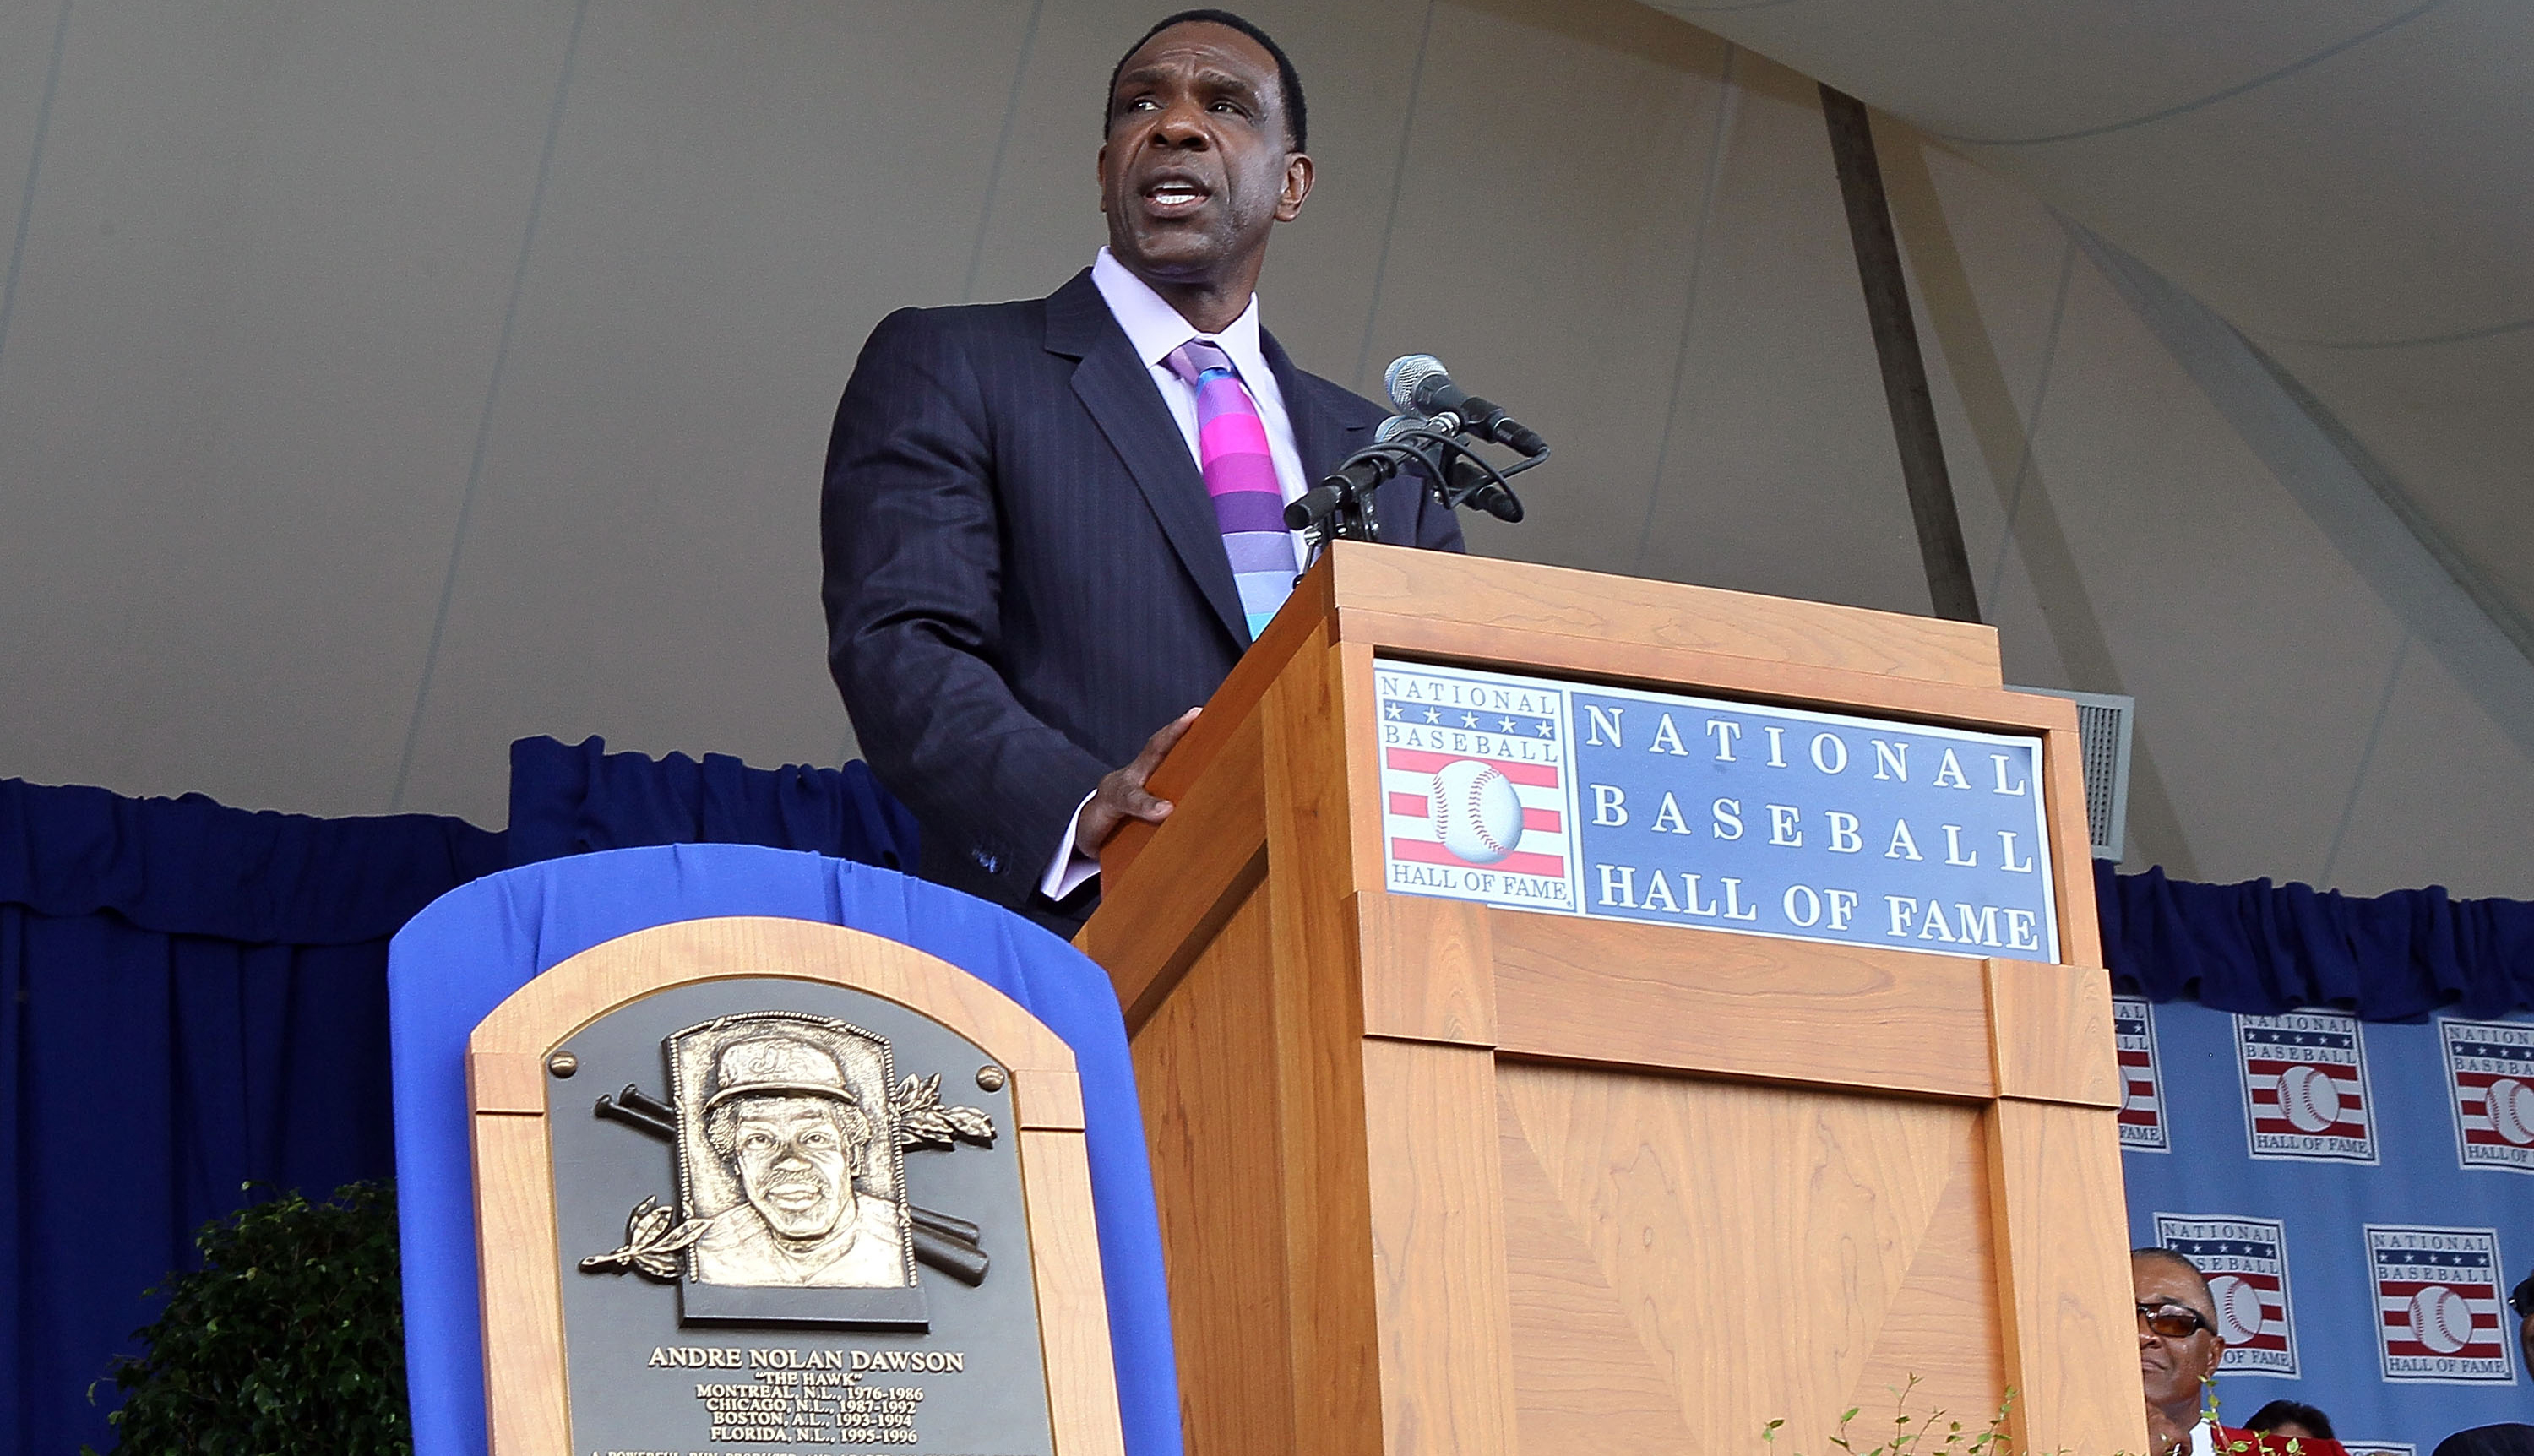 Andre Dawson is inducted into the hall of fame